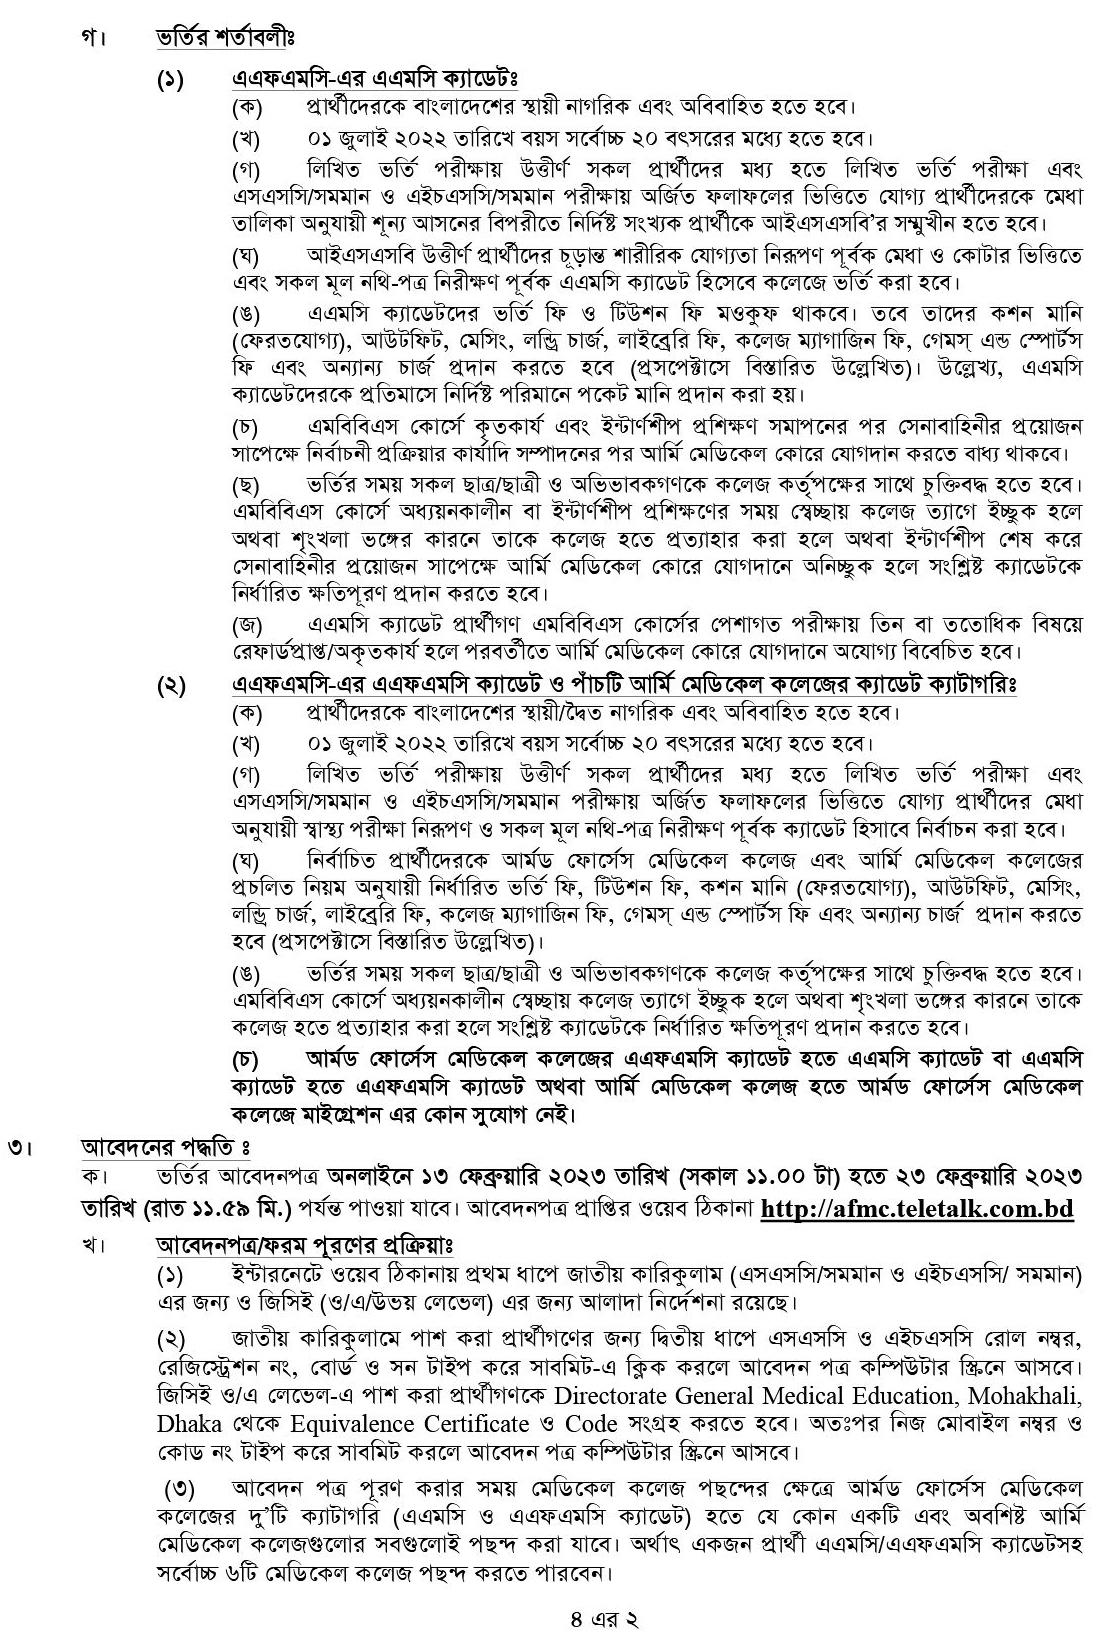 Armed Forces Medical College Admission Circular